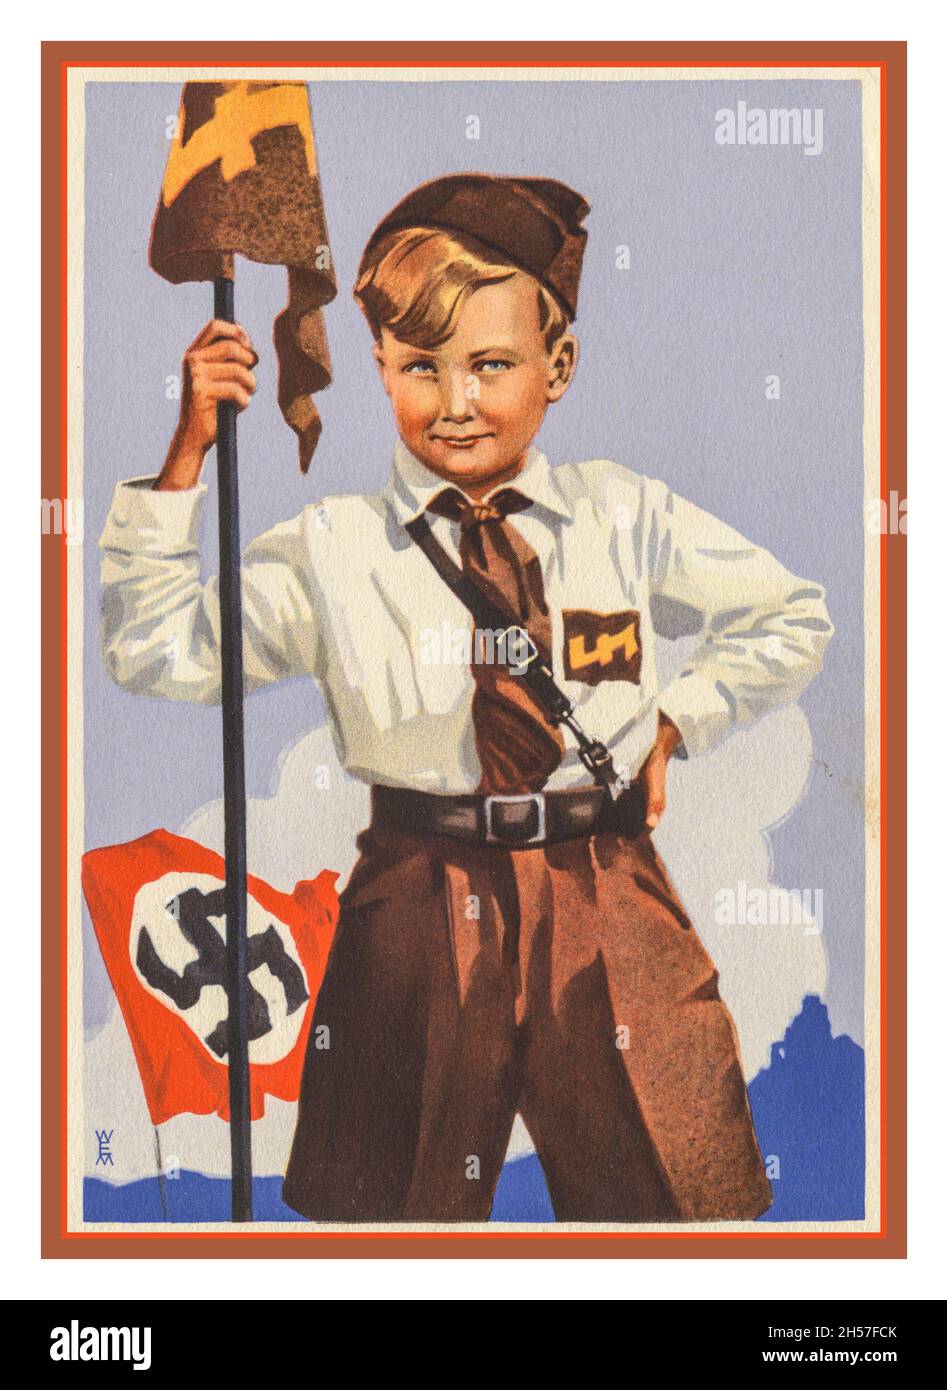 1930s HitlerJugend Hitler Youth European Propaganda Poster featuring a young boy 6-8 years in uniform, Wolfsangel emblem Swastika flag Verlag Zeitschrift MAR Historical with Nazi Germany swastika flag flying behind. Stock Photo